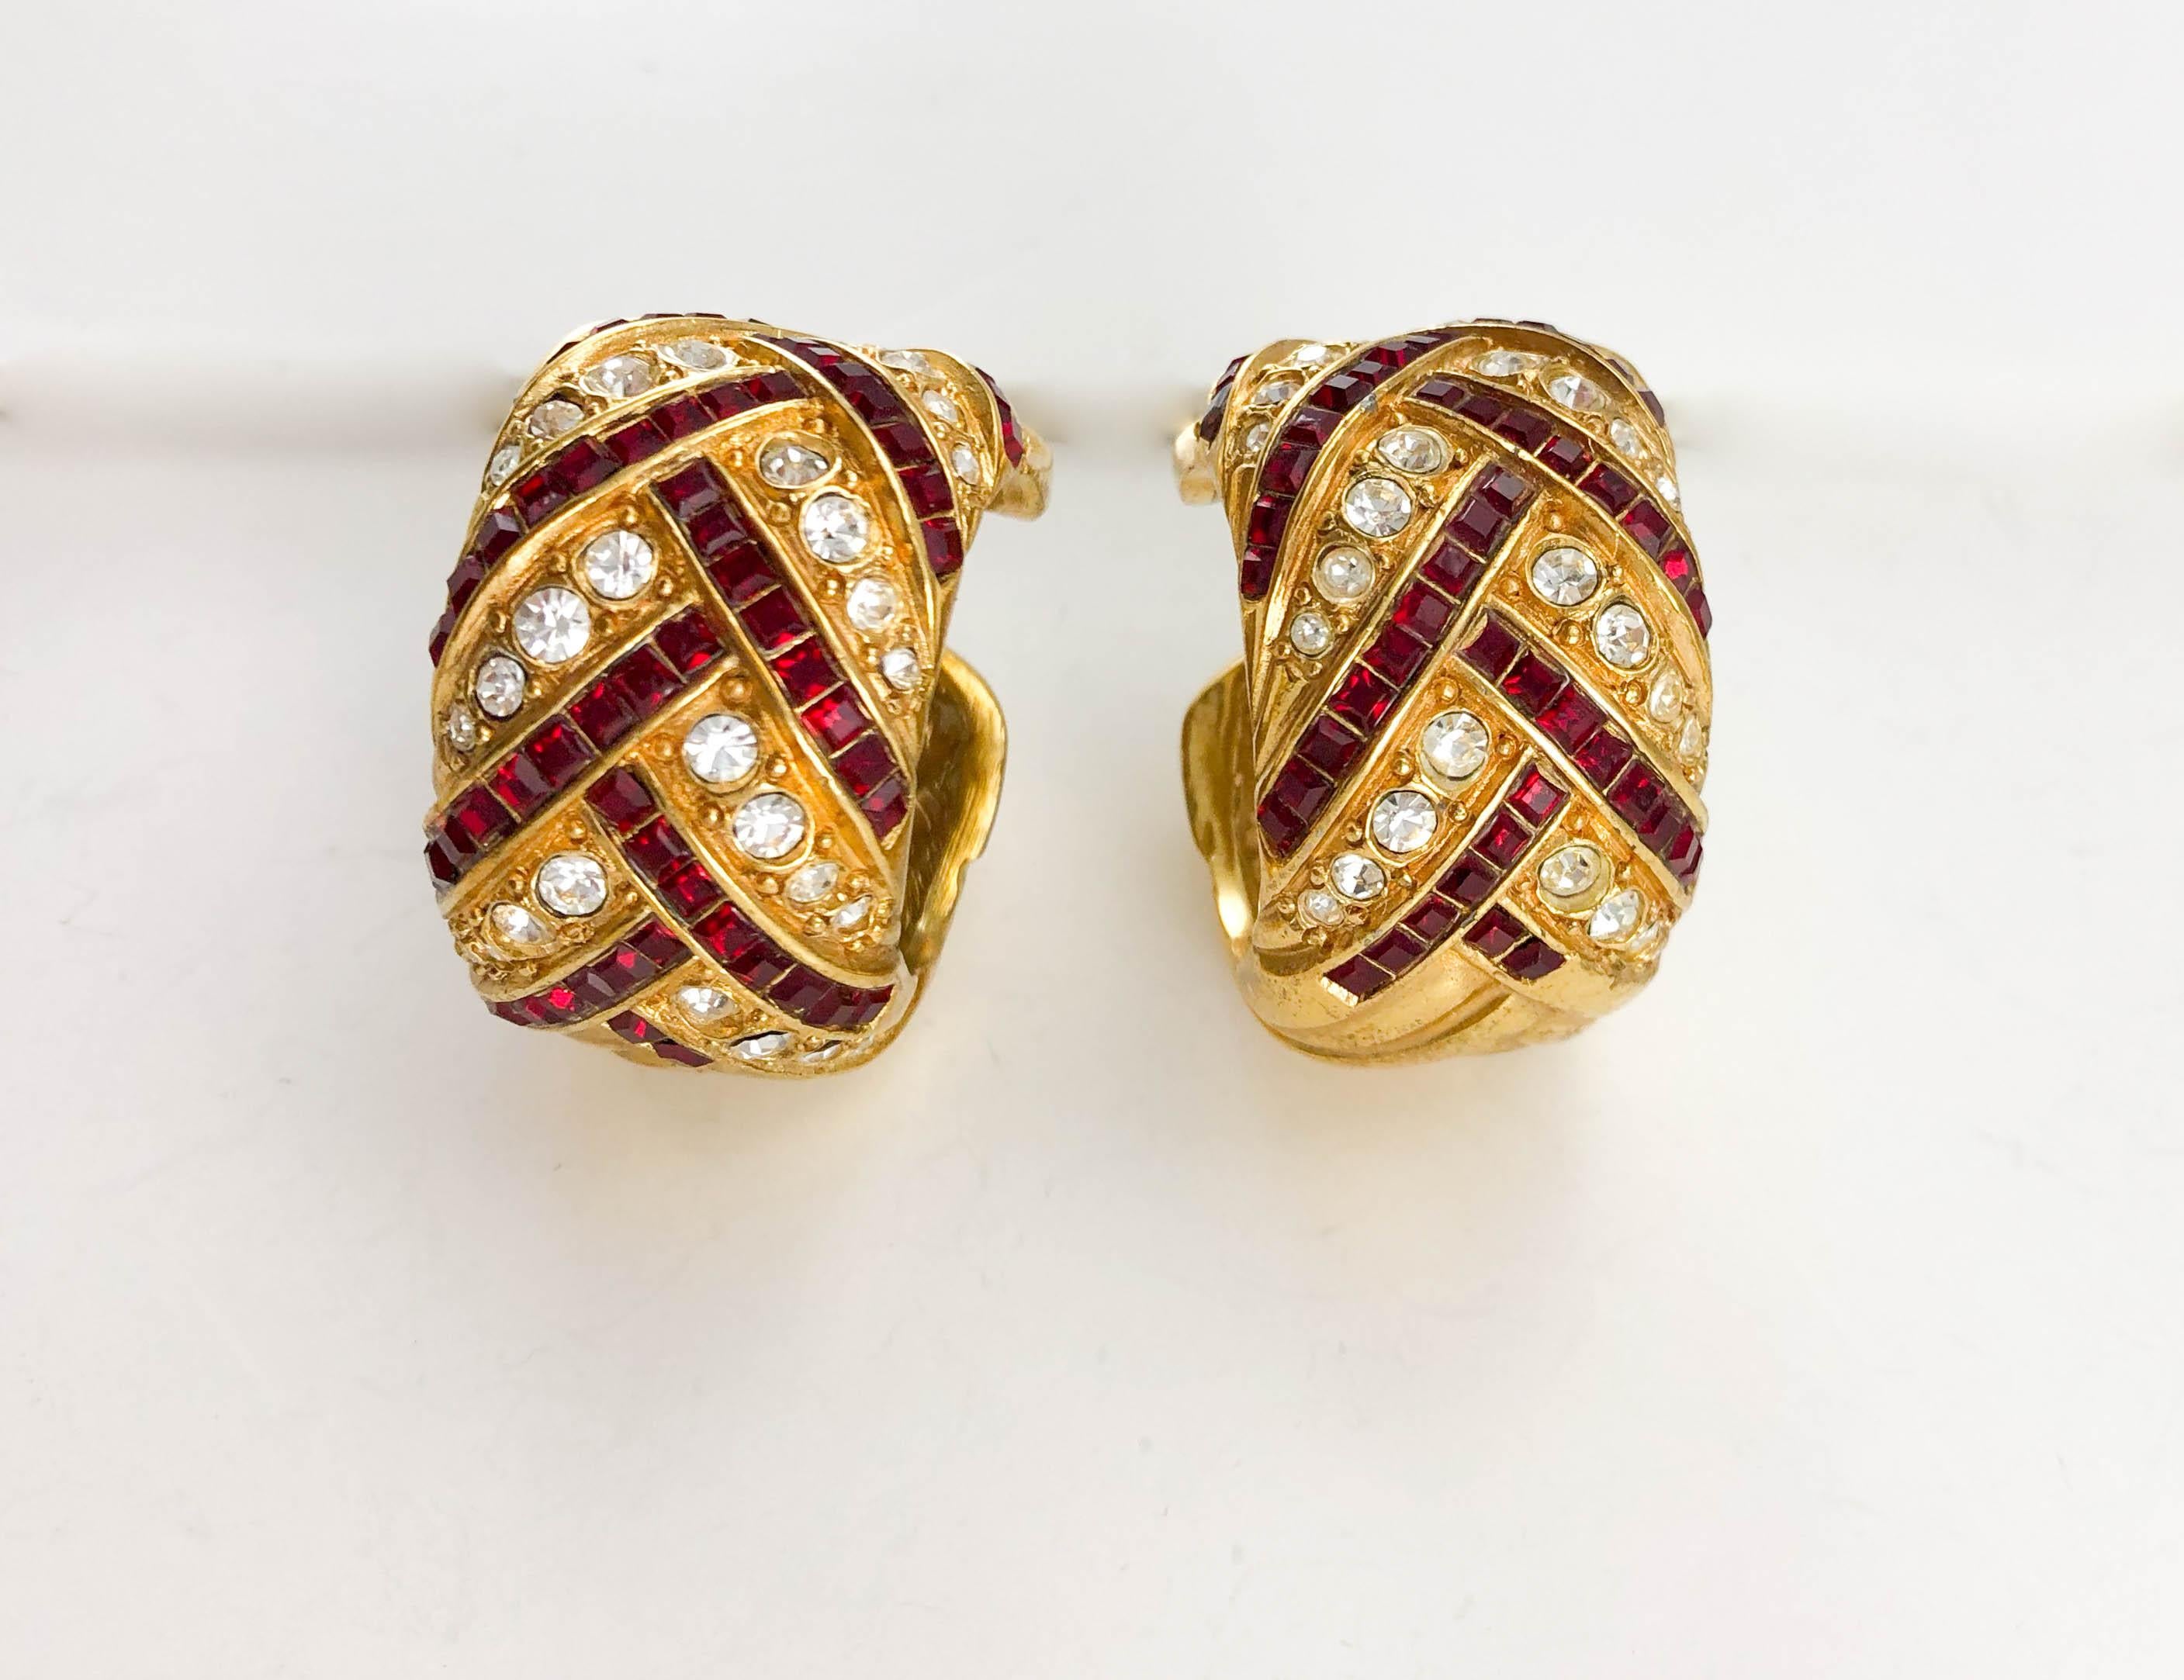 Vintage Yves Saint Laurent Crystal Embellished Clip-on Hoop Earrings. These gorgeous earrings by Yves Saint Laurent date back from the 1980’s. Made in gold-plated metal, they are adorned with round clear rhinestones and deep red square rhinestones.